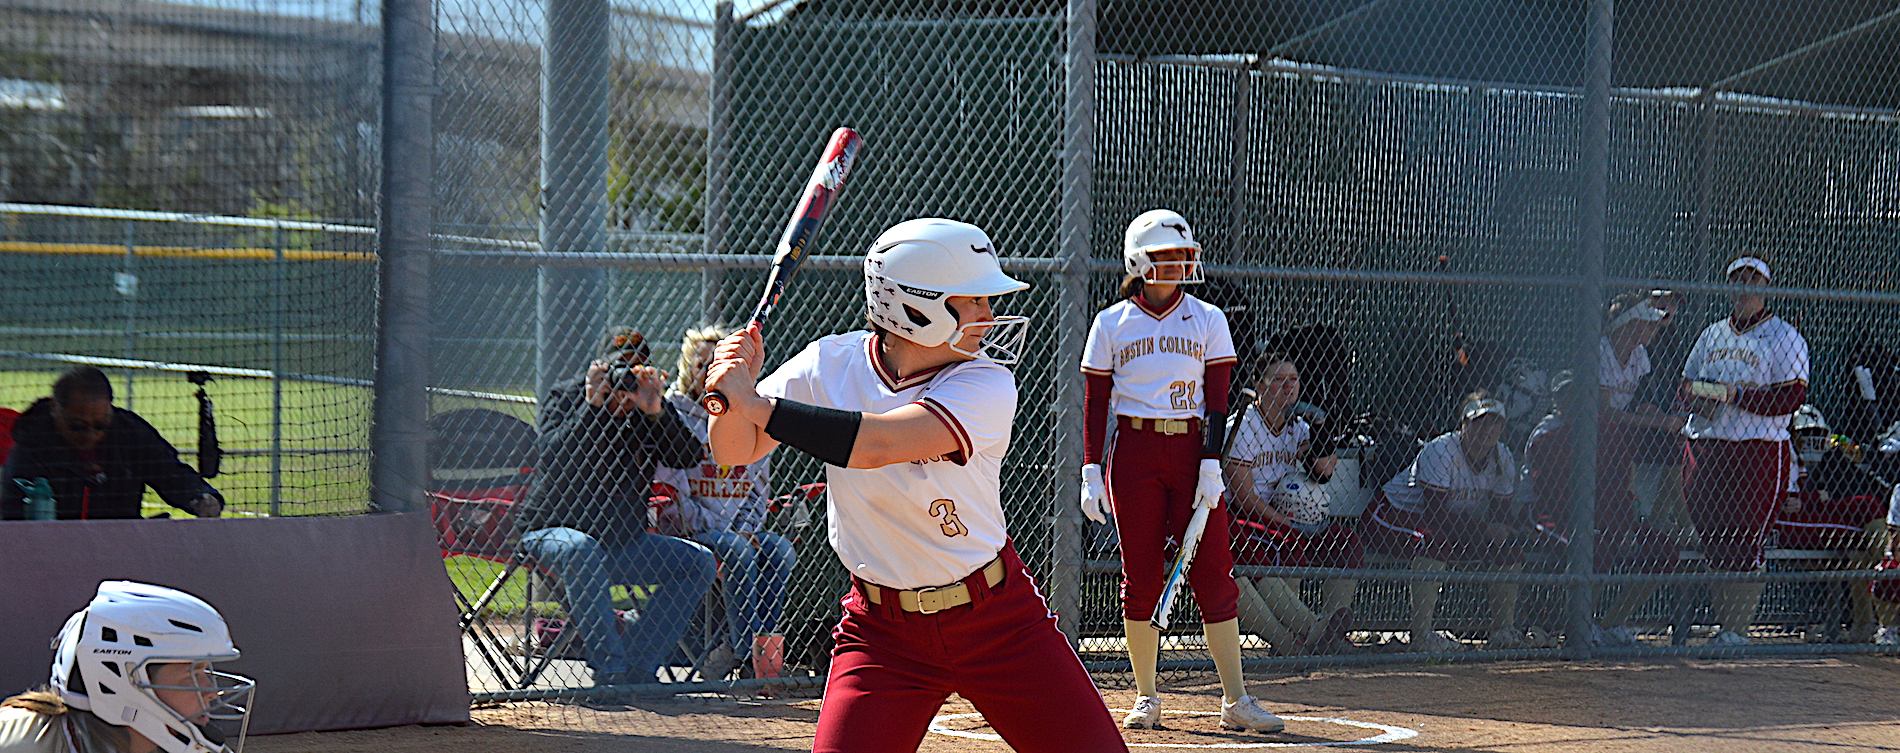 Hemby Named SCAC Hitter of the Week